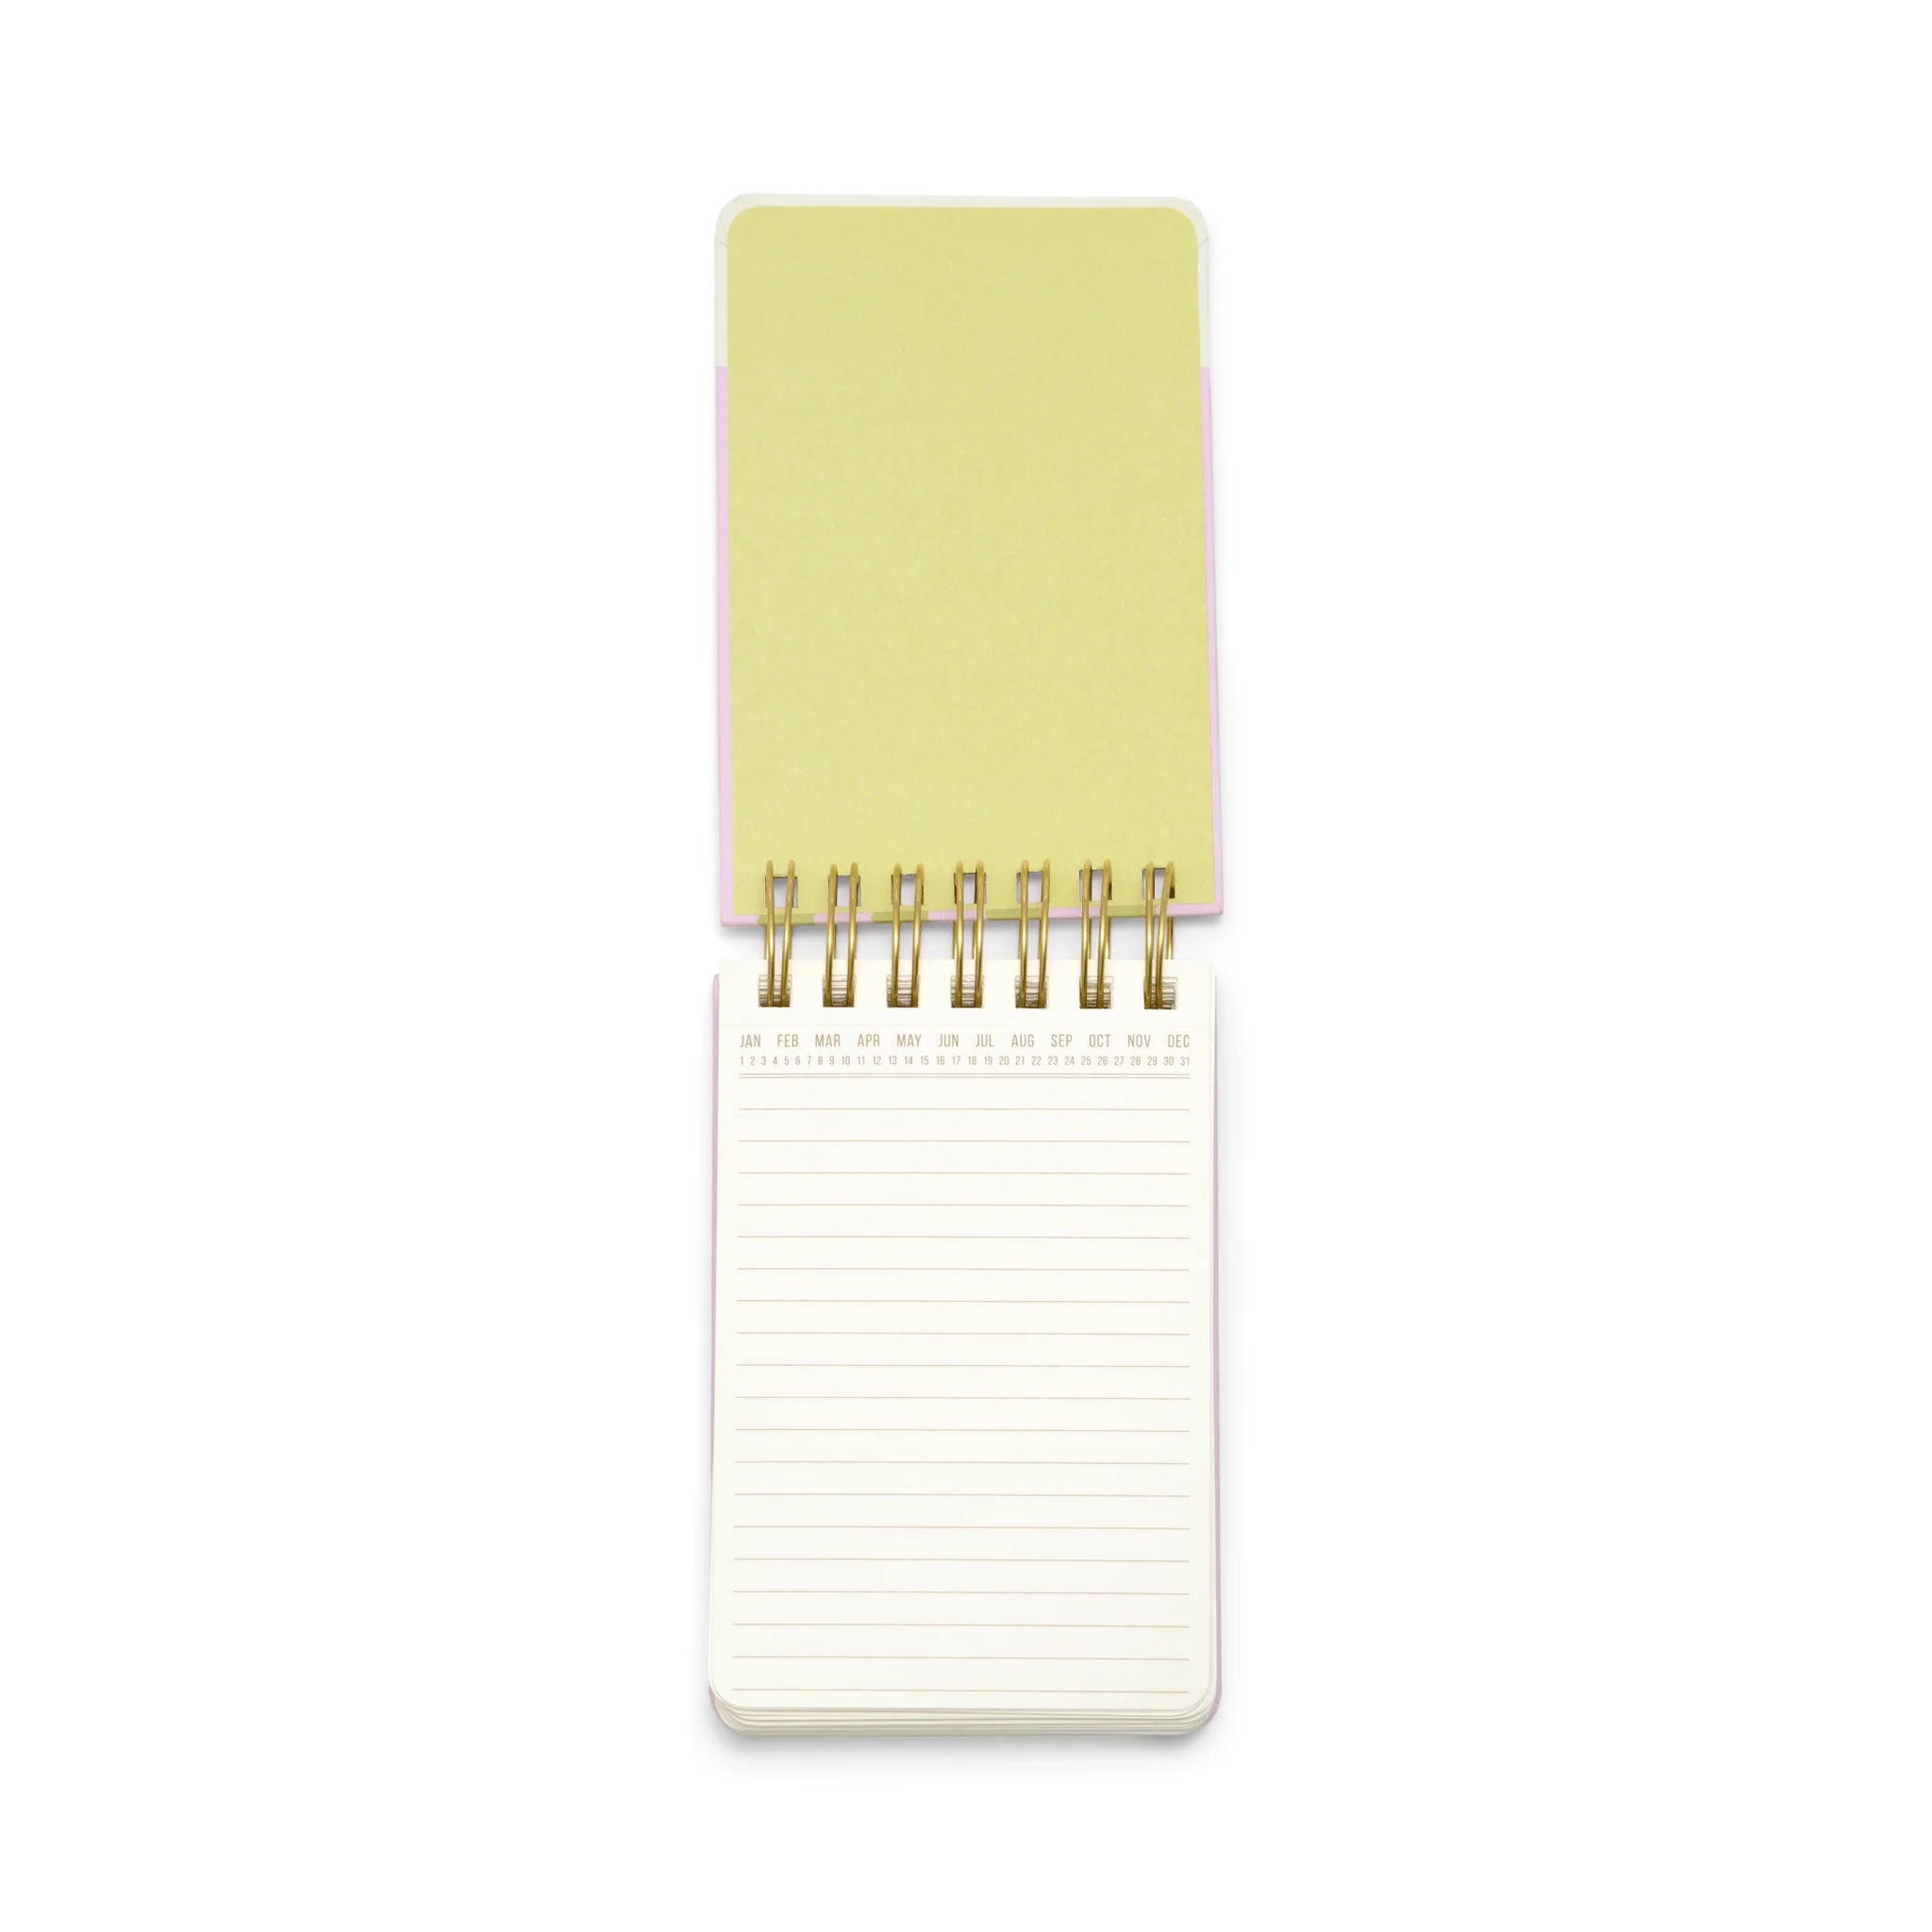 On a white background is a spiral bound notepad with lined pages. 